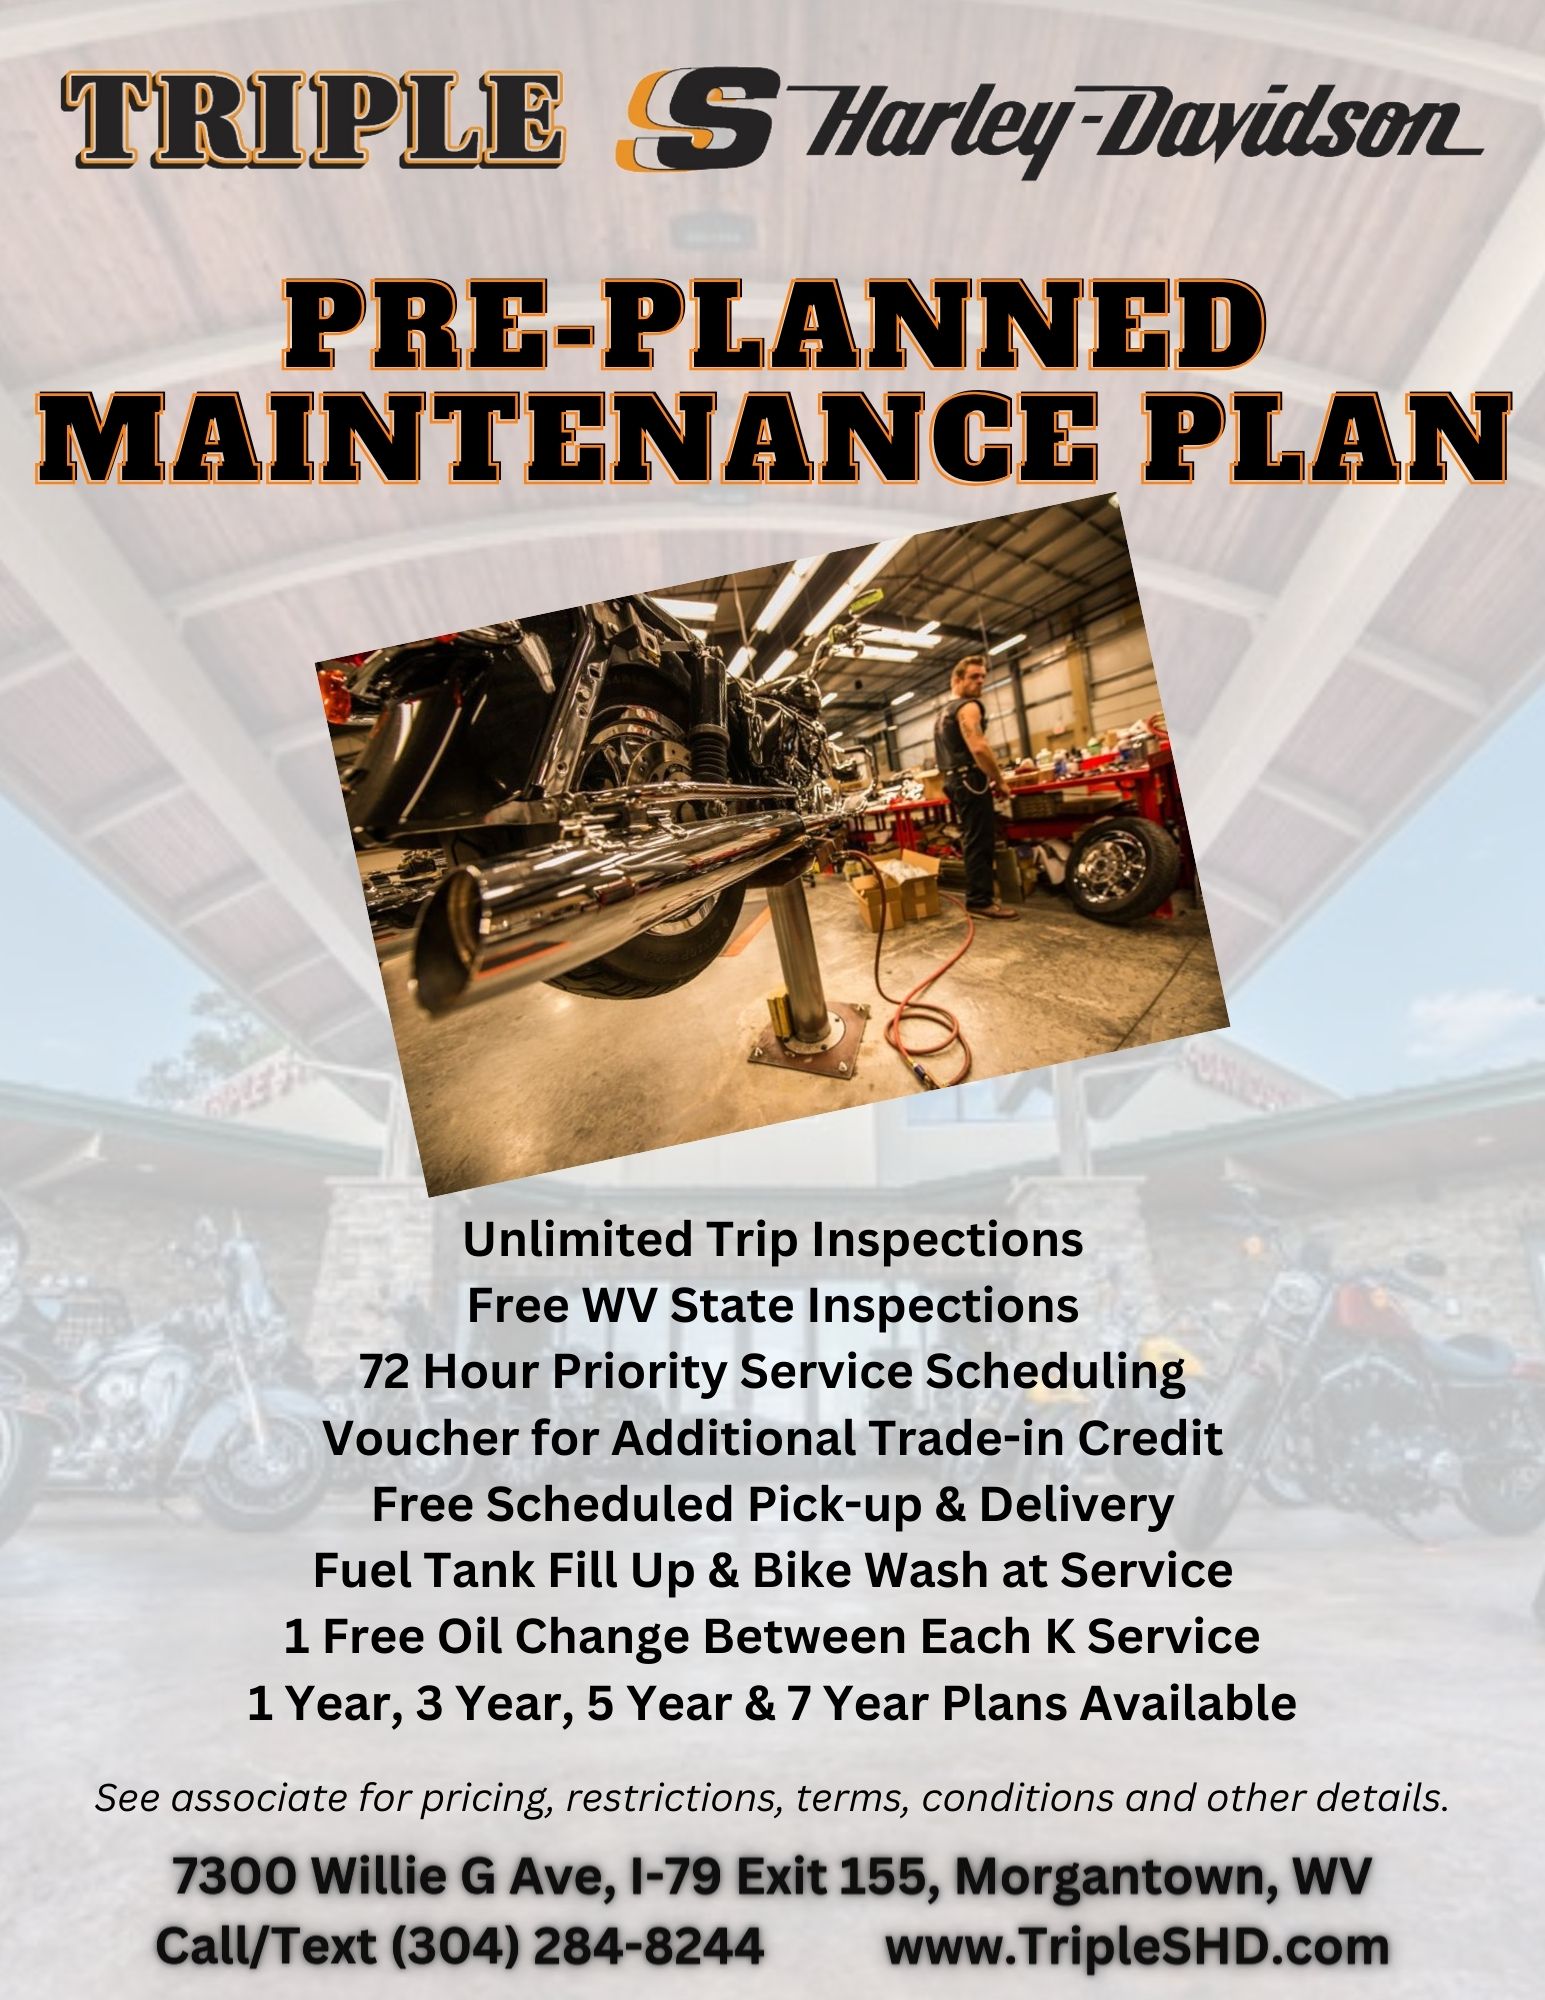 Planned Maintenance Package at Triple S Harley-Davidson in Morgantown, West Virginia; call or text (304) 284-8244 for information